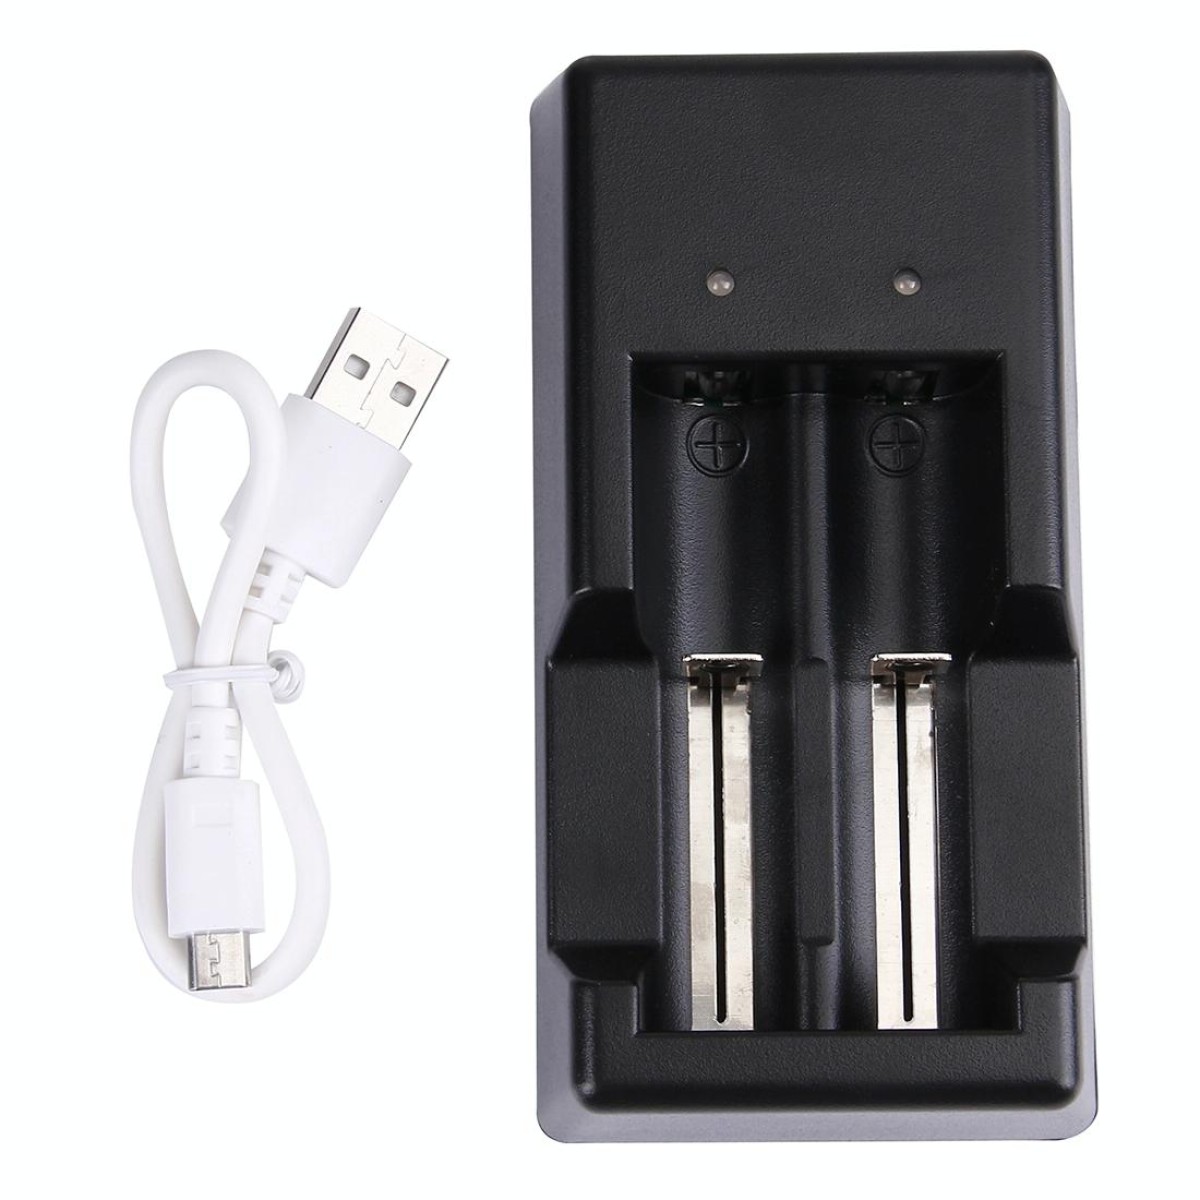 Universal USB 1.2V / 3.7V Rechargeable Battery Charger